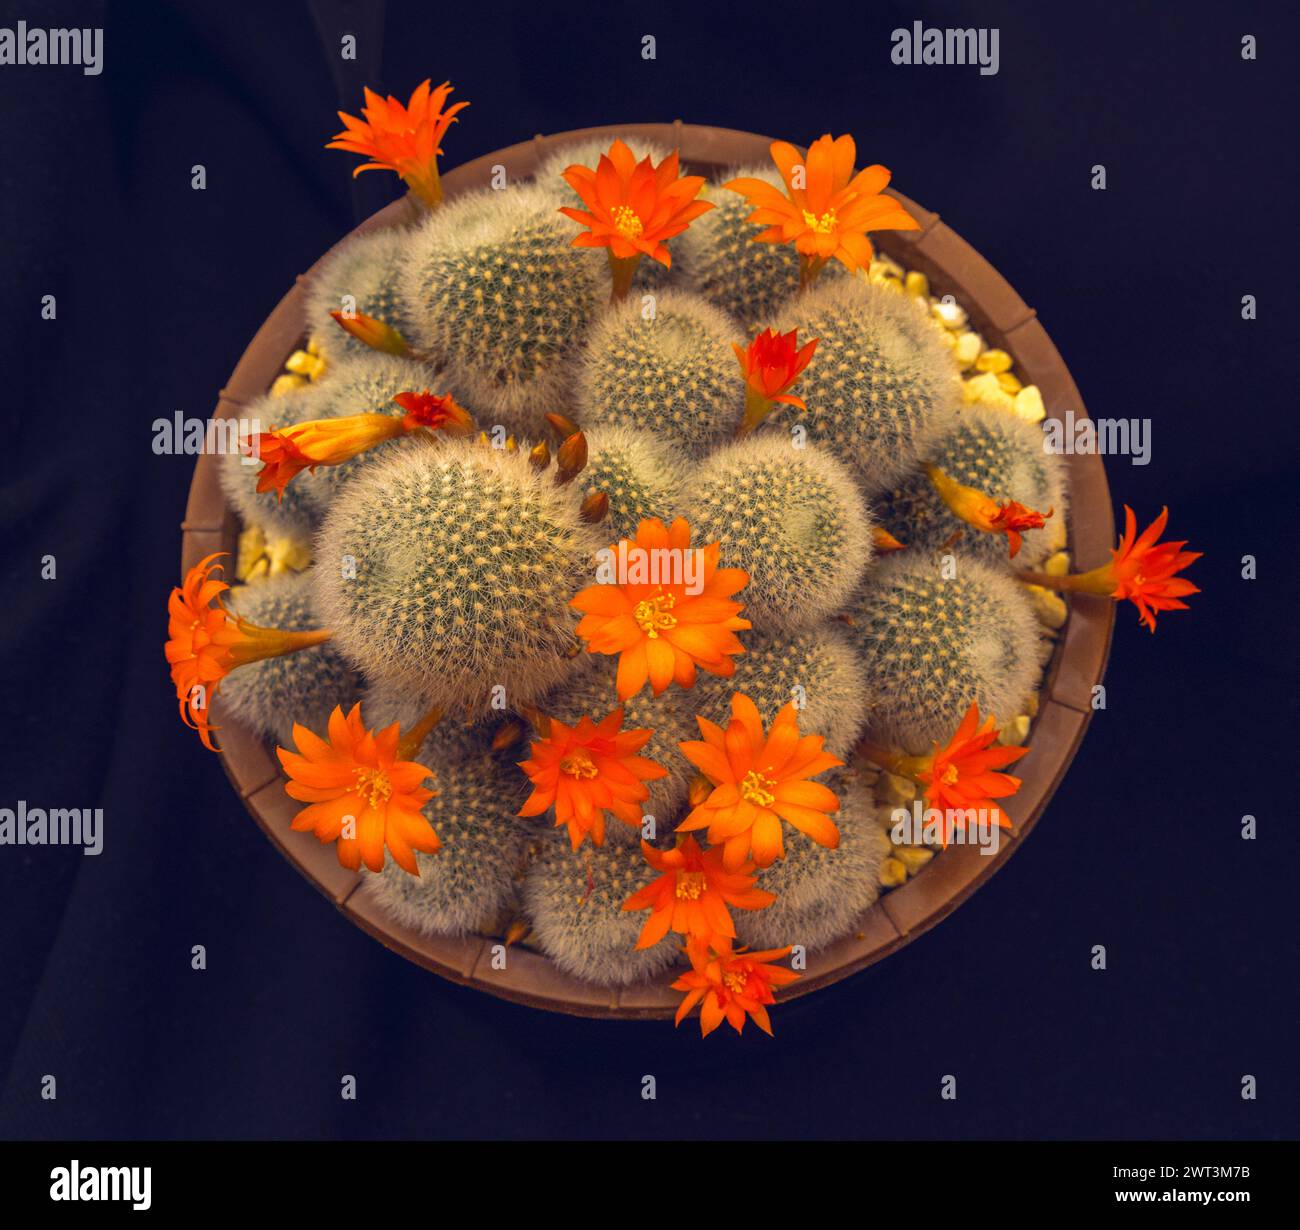 Robutia Cactus with beautiful orange/red flowers, pictured from above in a circular pot. Stock Photo